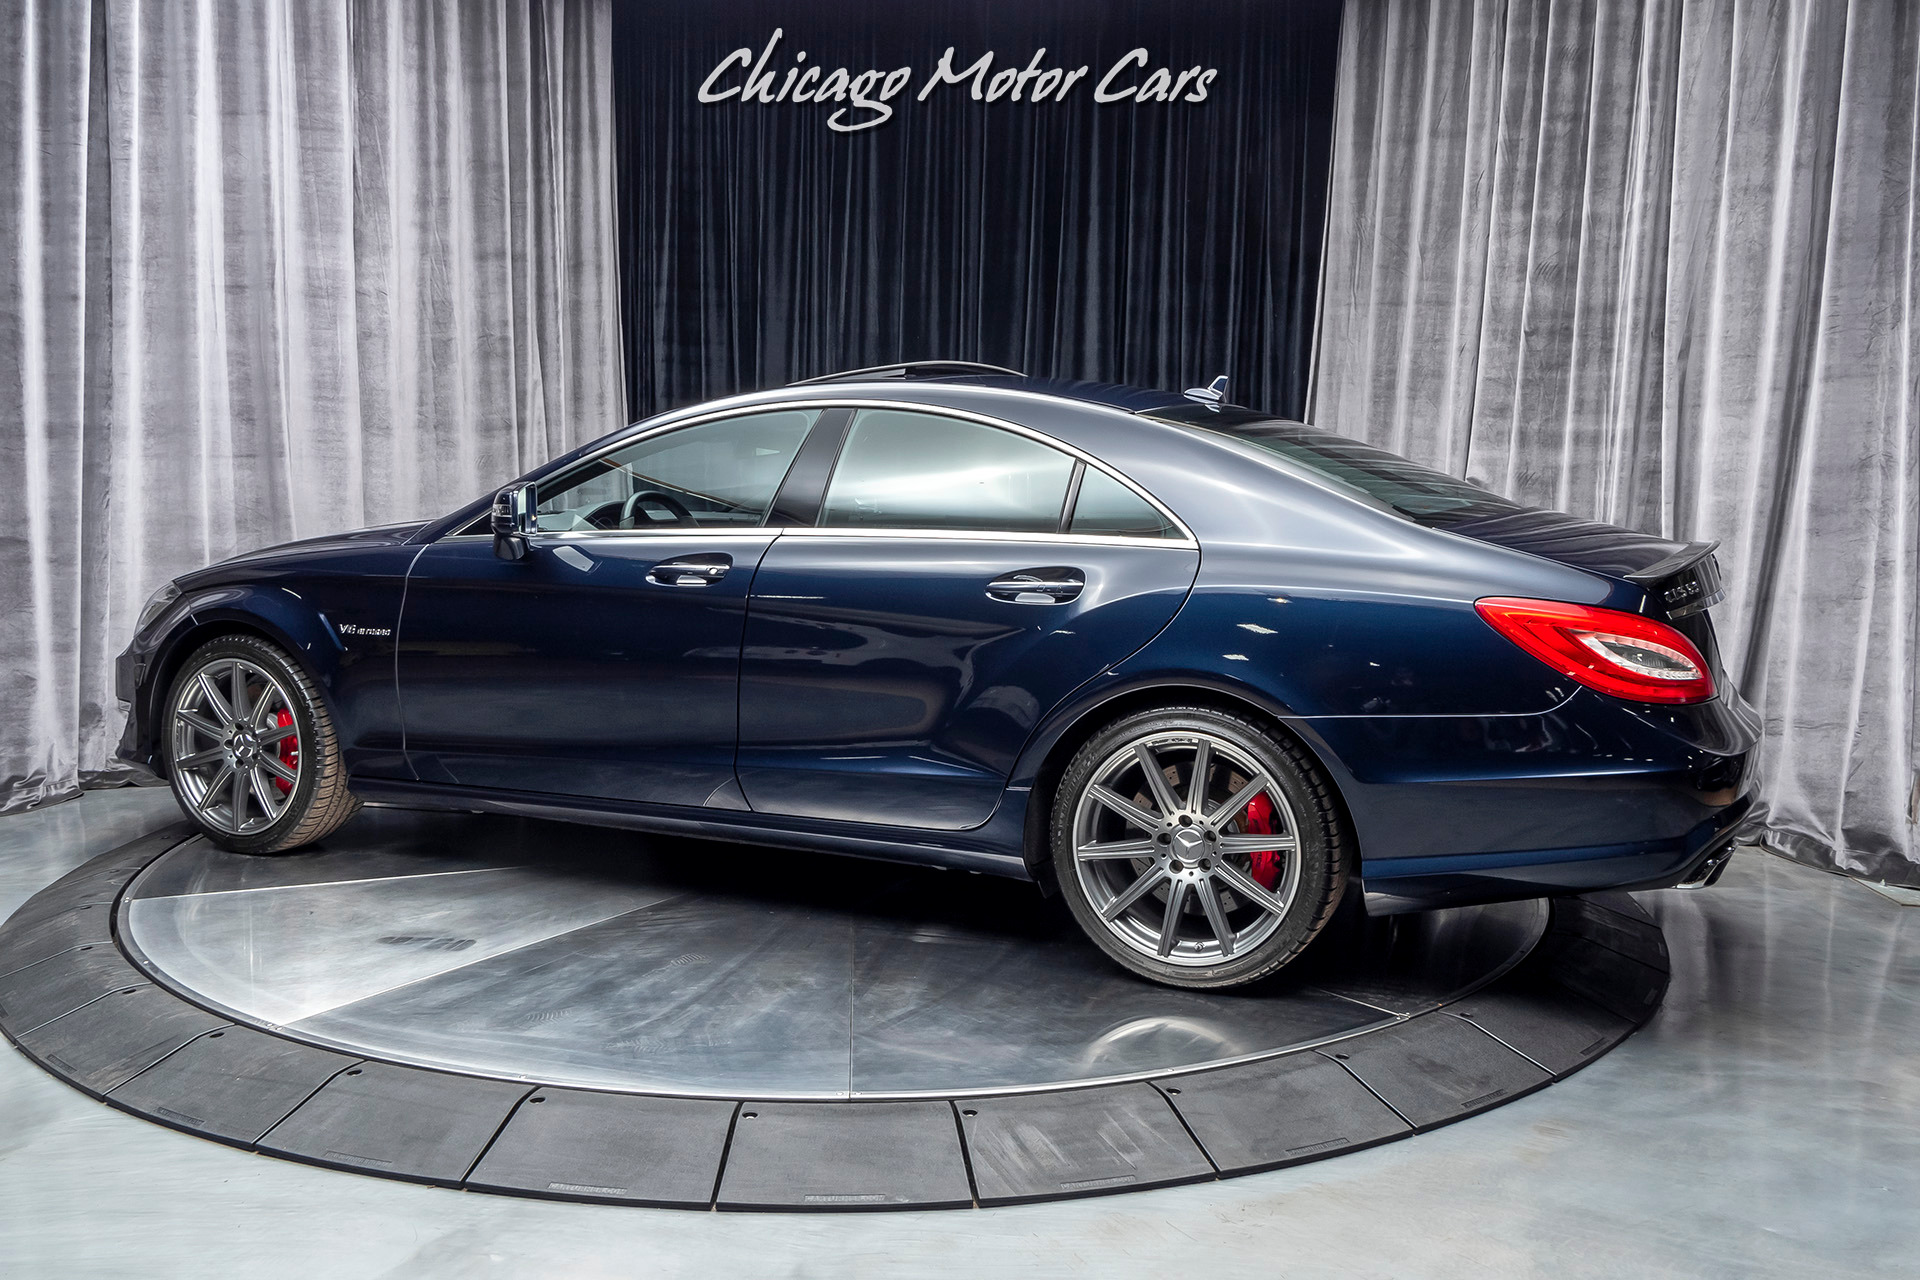 Used 14 Mercedes Benz Cls63 Amg S Model 4matic Original List 130k For Sale Special Pricing Chicago Motor Cars Stock